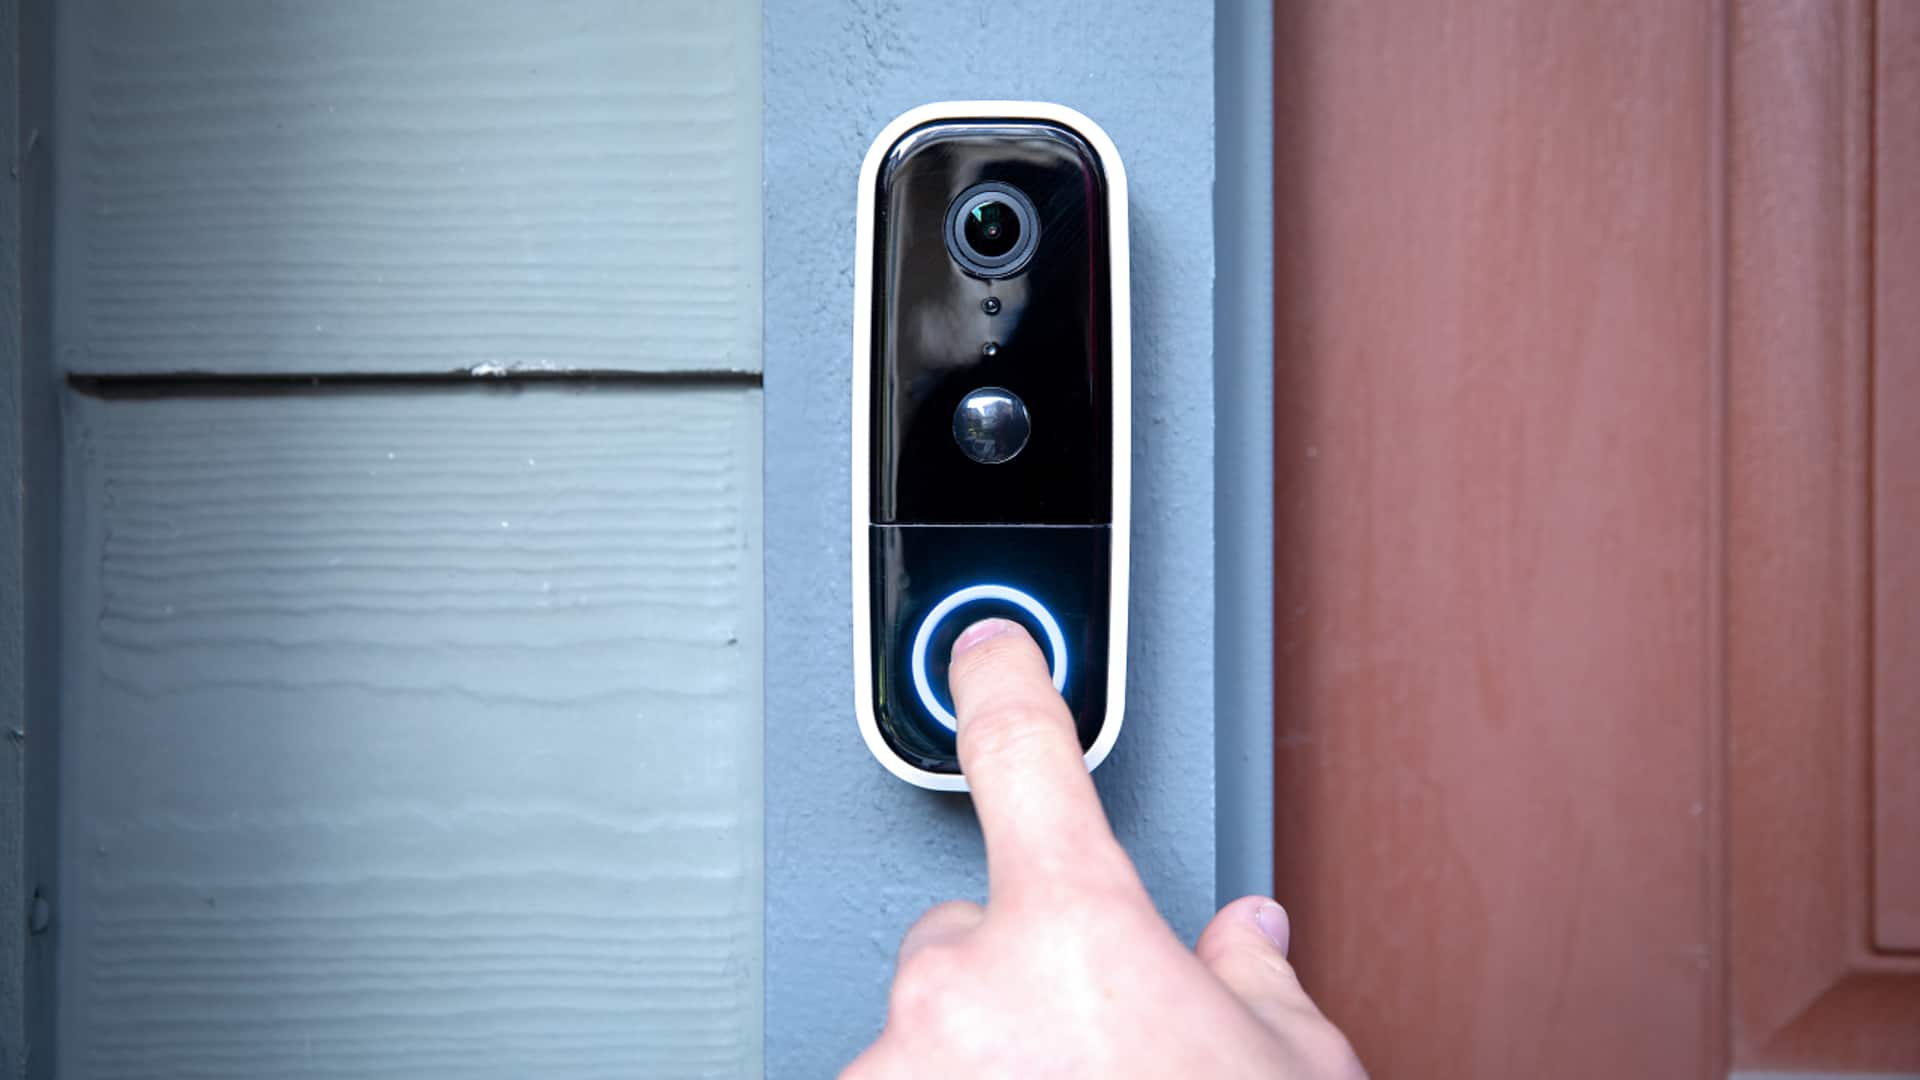 Security flaws found in doorbell cameras sold on Amazon, Walmart